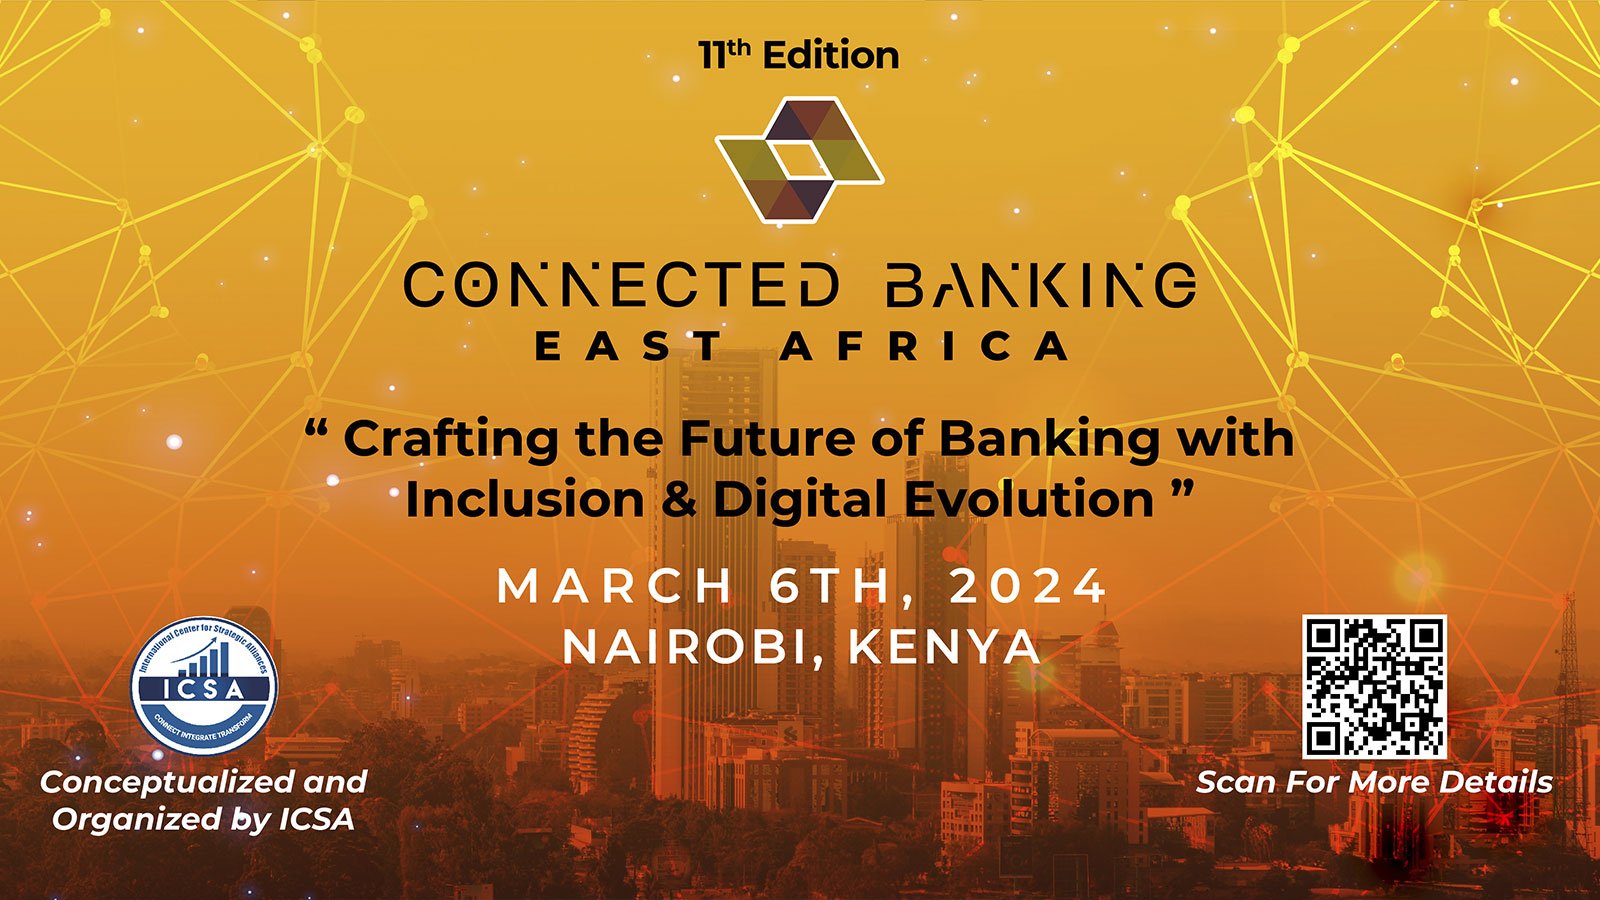 11th Edition Connected Banking Summit - Innovation & Excellence Awards; East Africa 2024 Crafting the Future of Banking with Inclusion & Digital Evolution